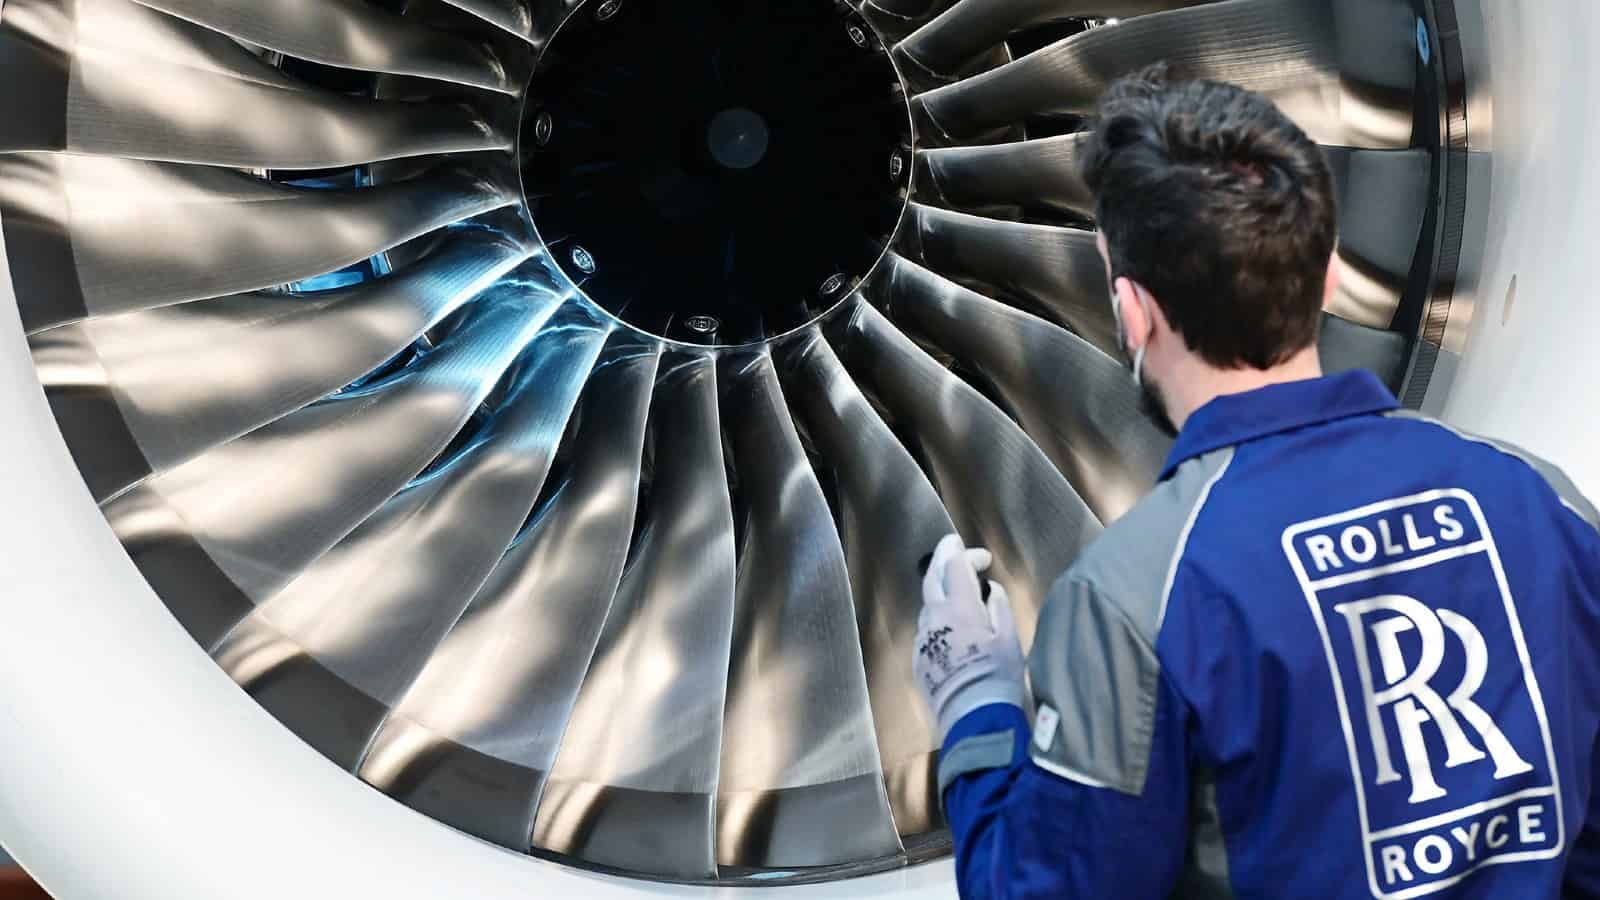 has the rolls-royce share price peaked?